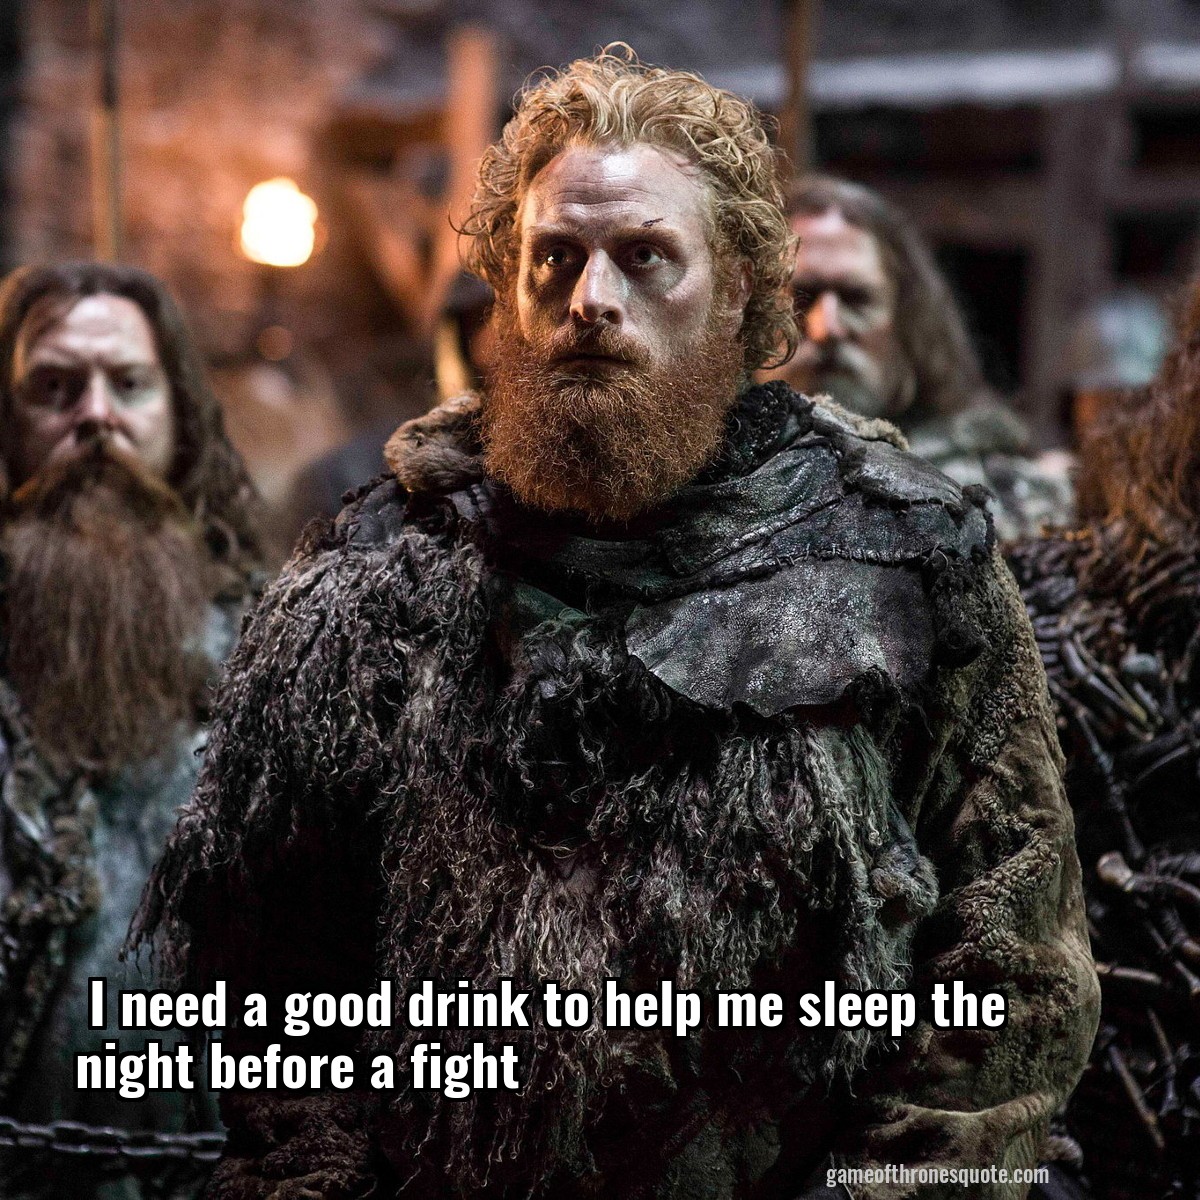  I need a good drink to help me sleep the night before a fight